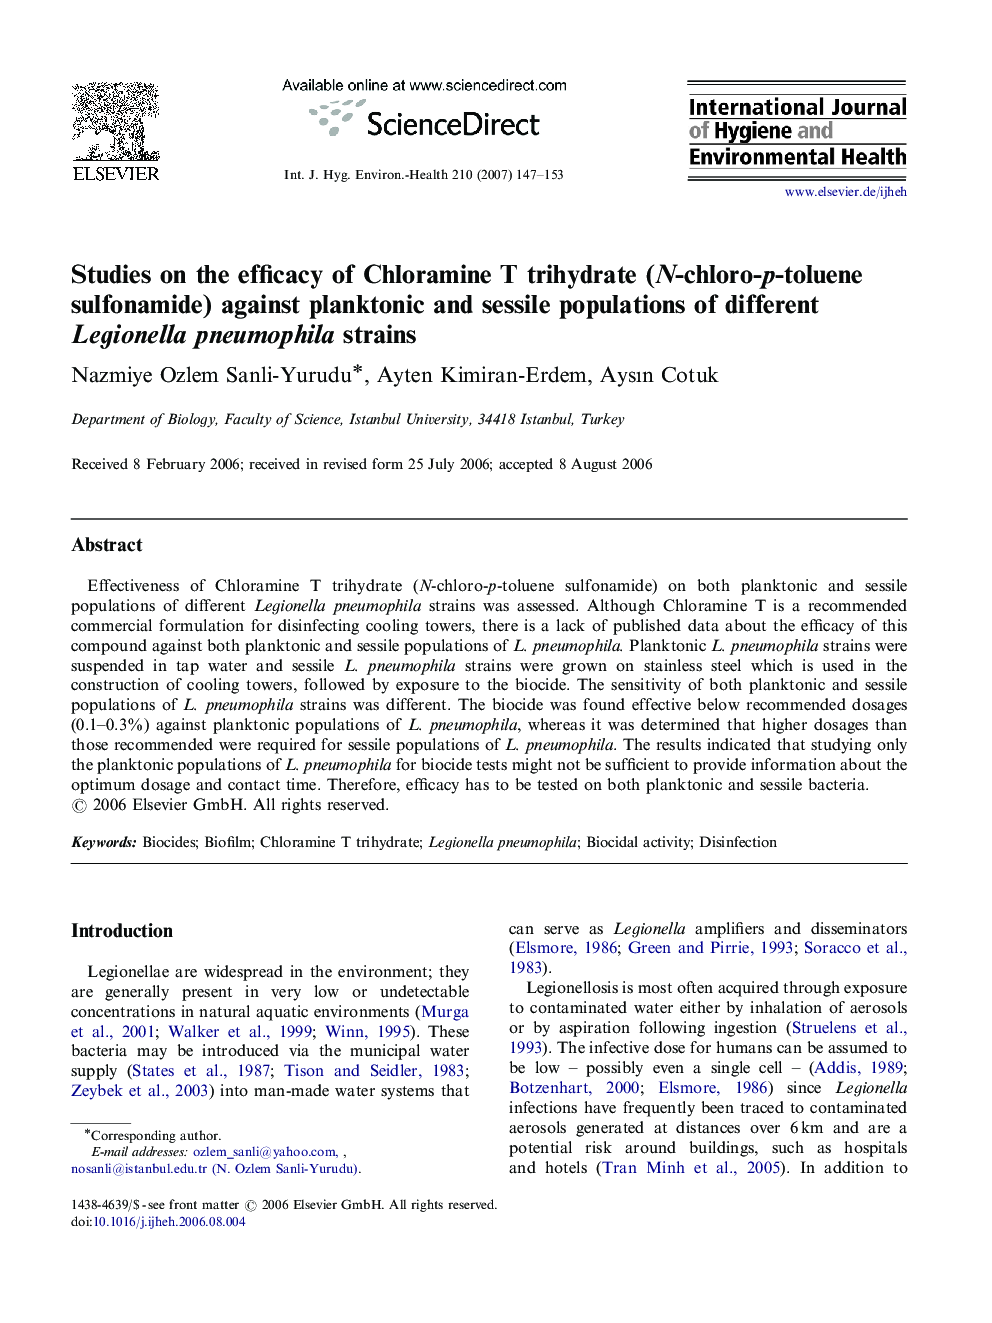 Studies on the efficacy of Chloramine T trihydrate (N-chloro-p-toluene sulfonamide) against planktonic and sessile populations of different Legionella pneumophila strains